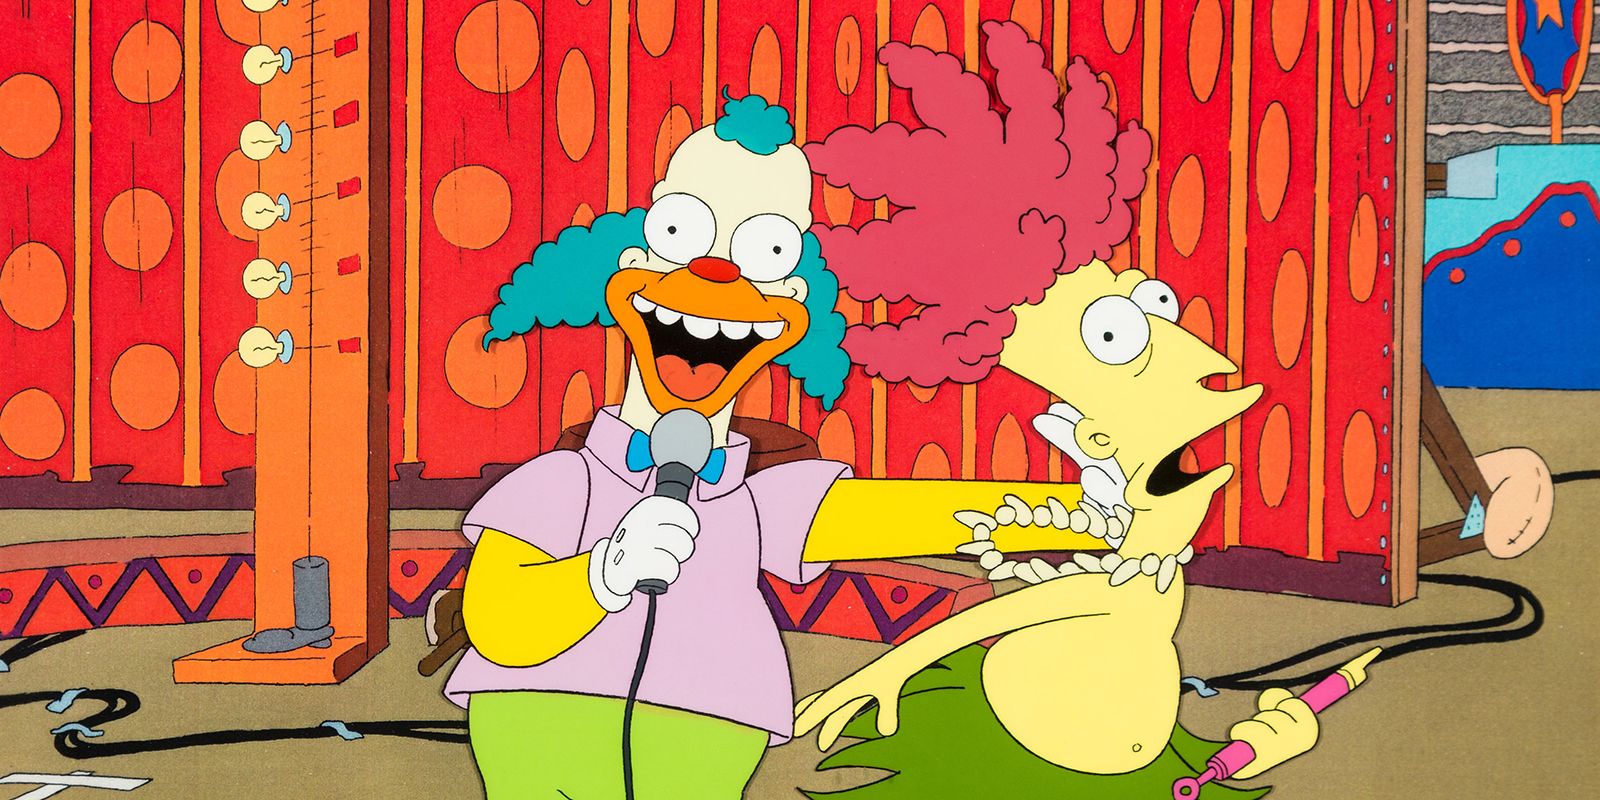 Krusty and Sideshow Bob in The Simpsons